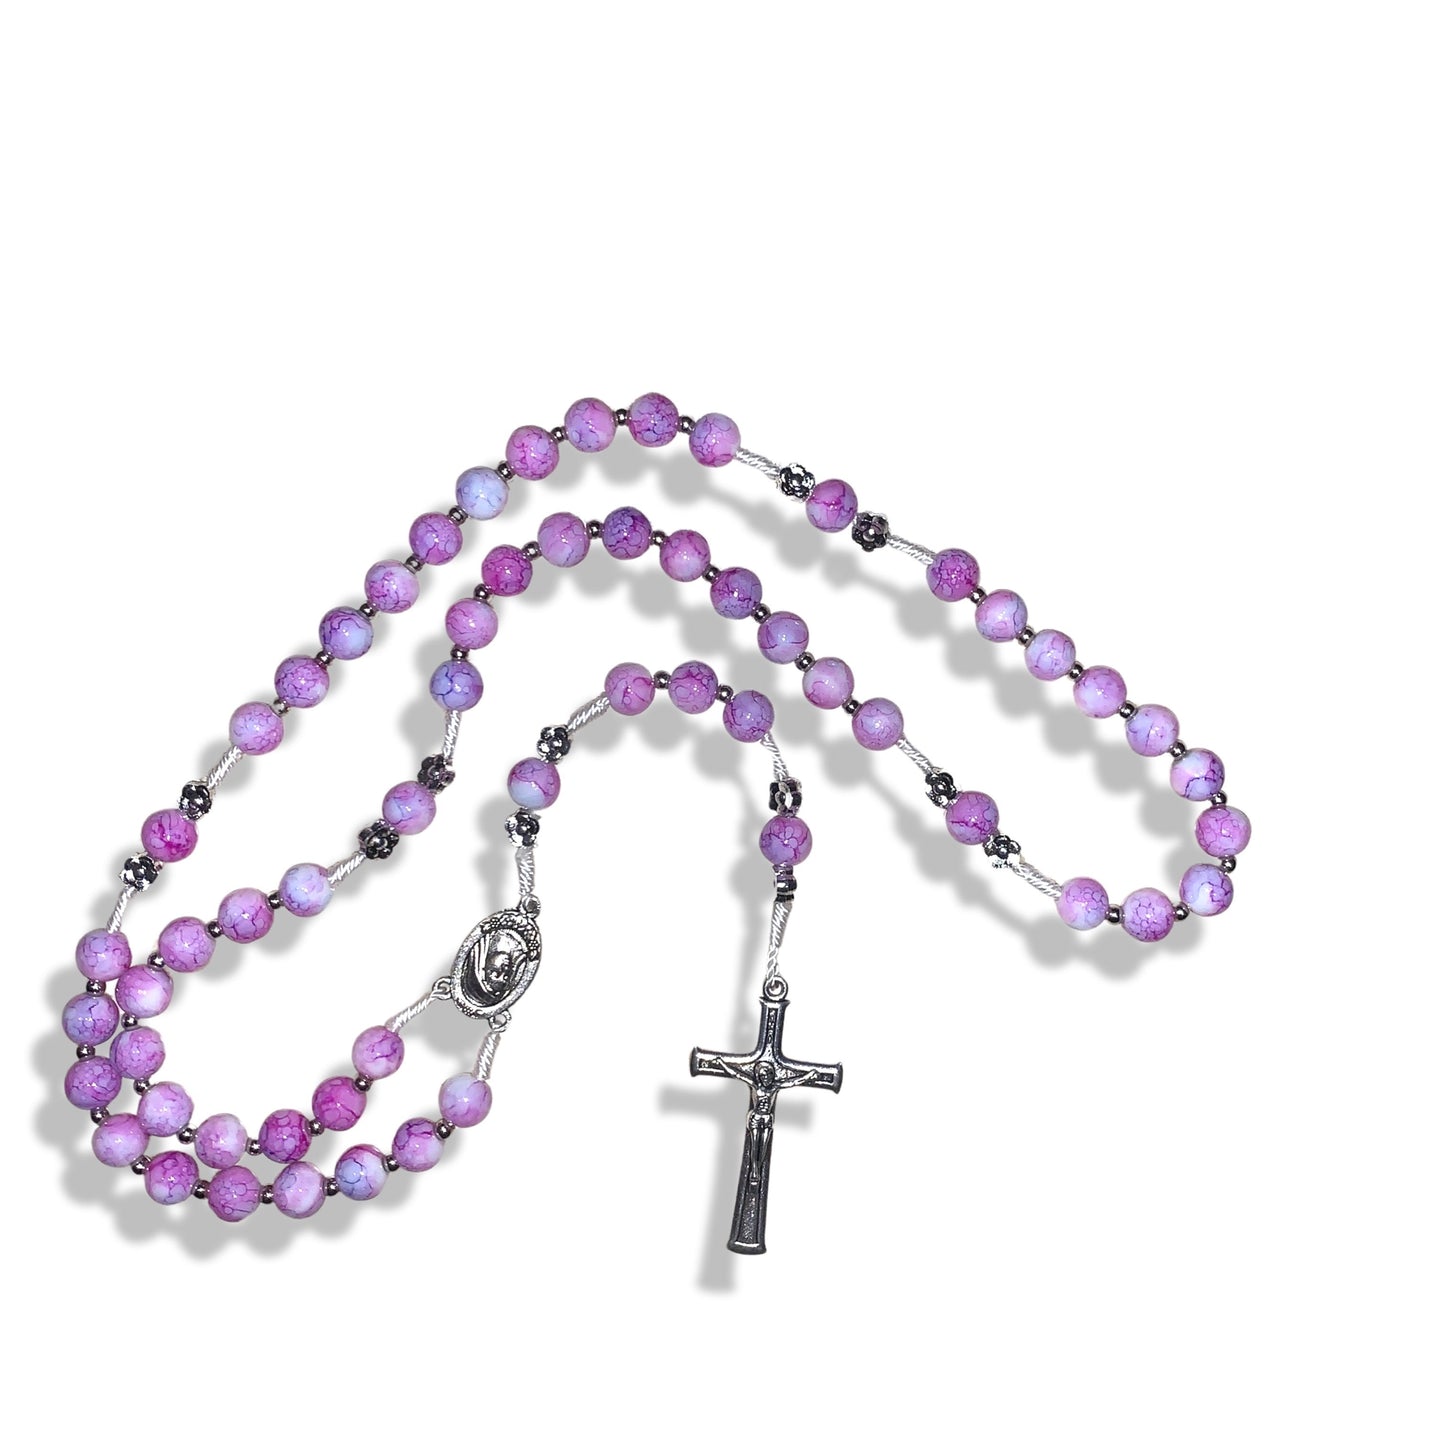 Marbled Queen of Peace Rosary with Soil of Assorted Colors